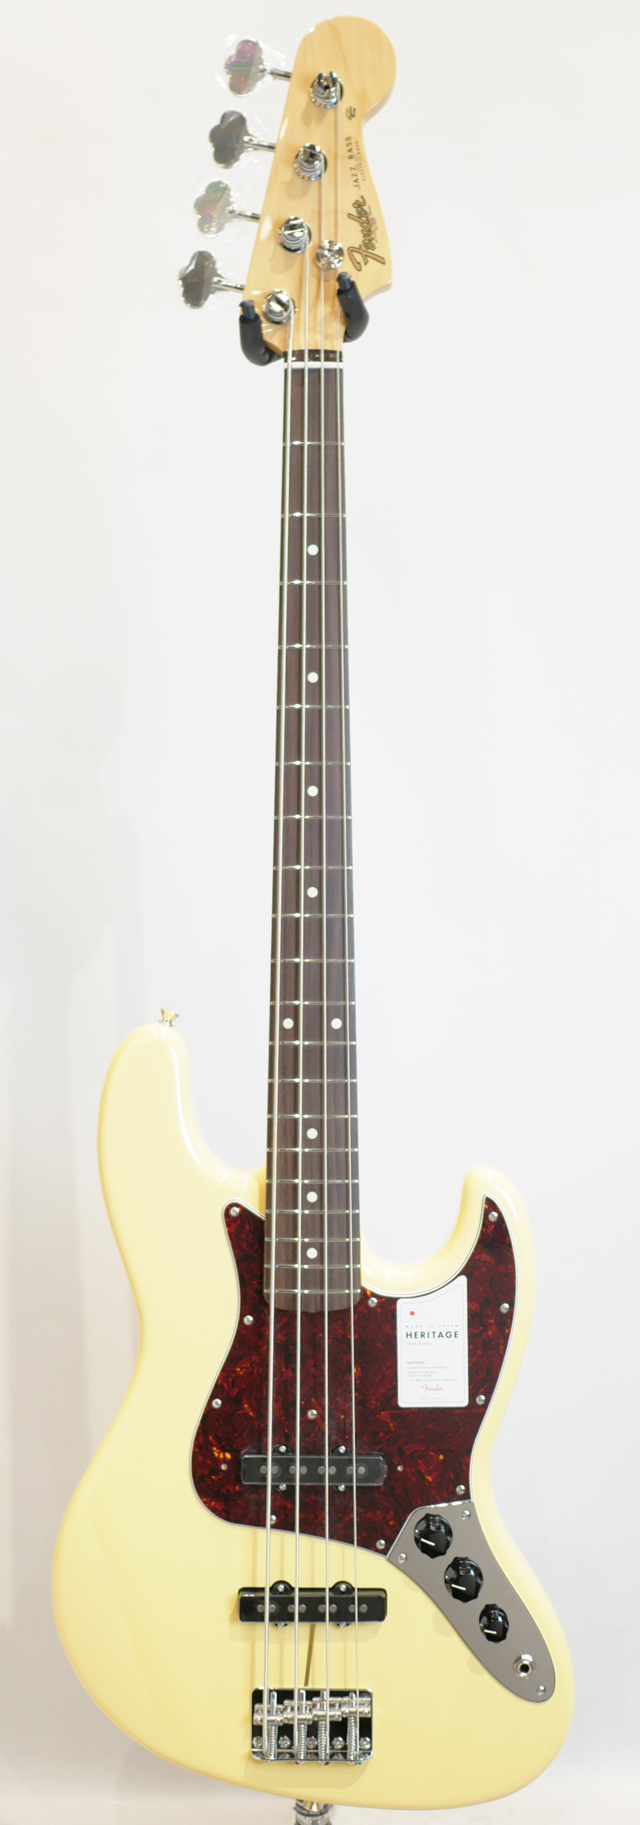 FENDER/JAPAN MADE IN JAPAN HERITAGE 60S JAZZ BASS / Vintage White フェンダー/ジャパン サブ画像2